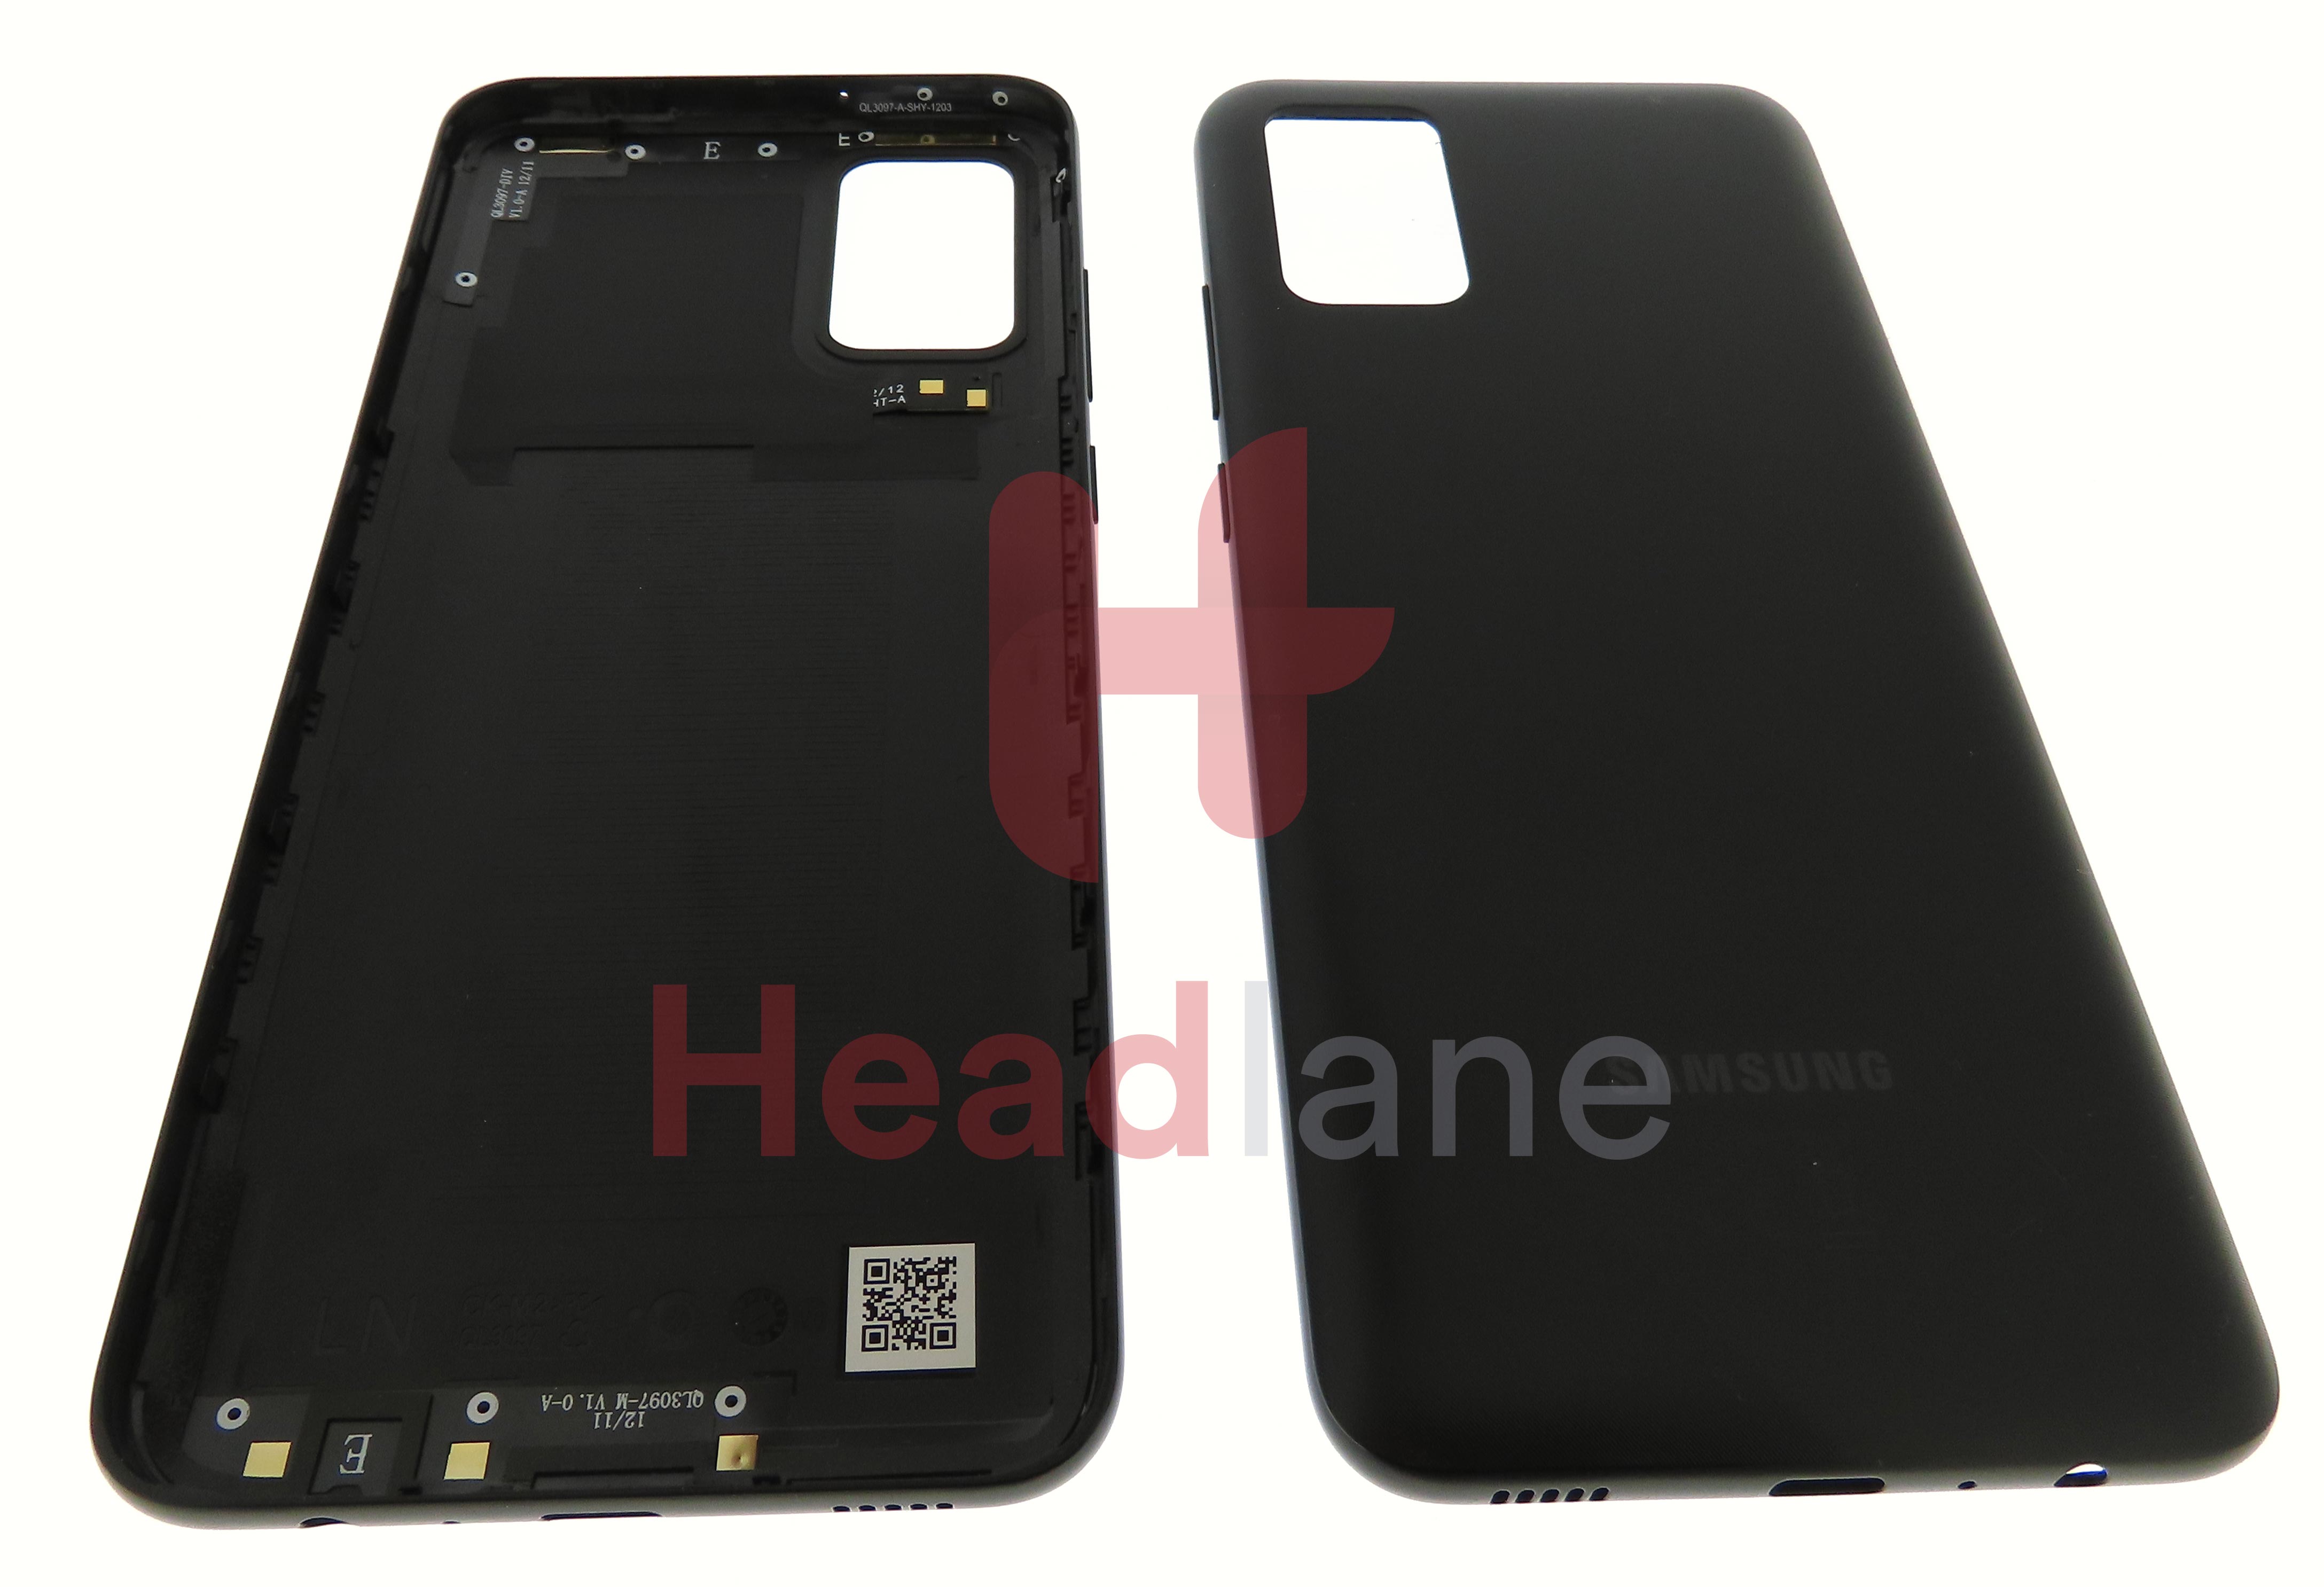 Samsung SM-A025 Galaxy A02s Back / Battery Cover - Black